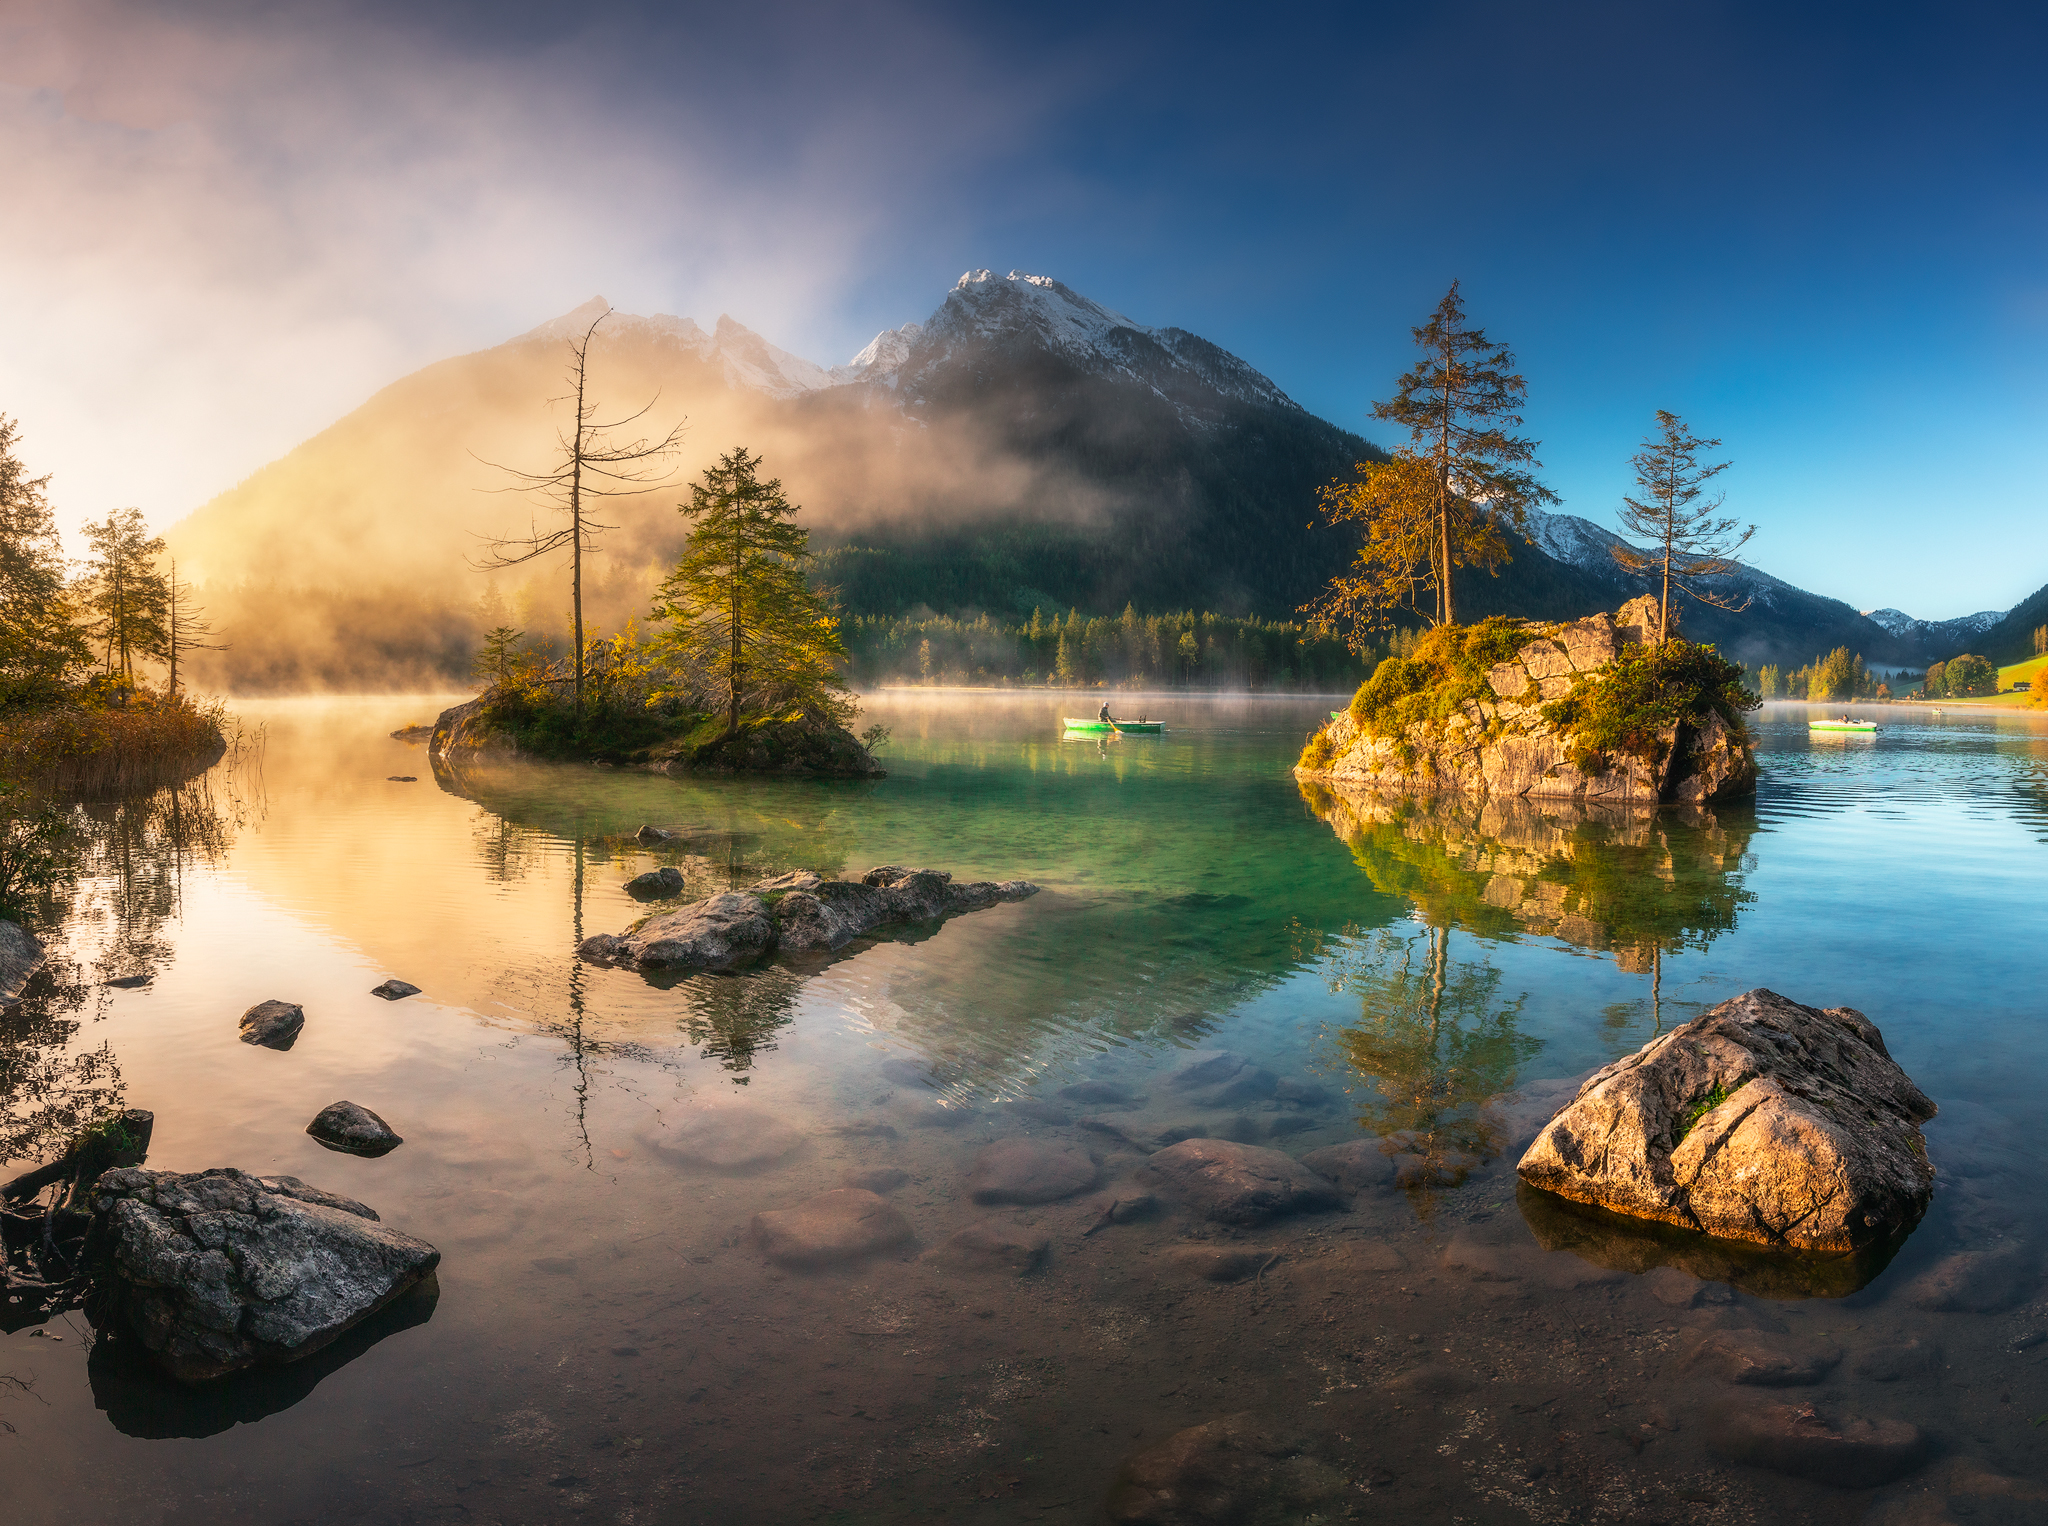 General 2048x1526 mountains water boat rocks river nature outdoors photography landscape waterscape reflection Pawel Uchorczak sky mist trees fall